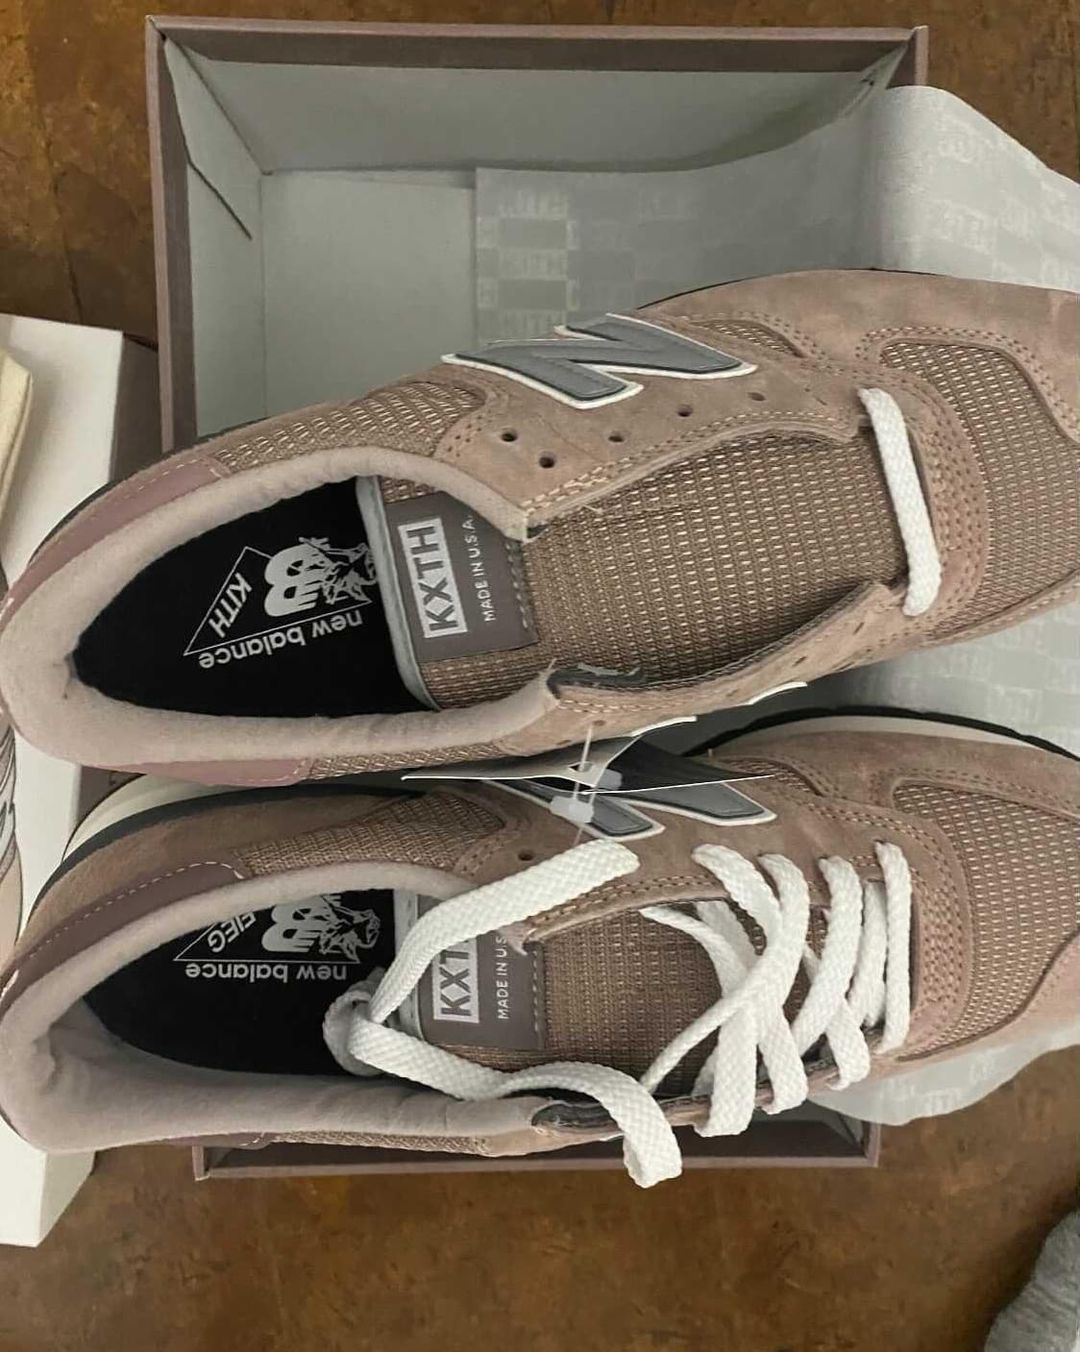 Kith Dec 10, 2021v1 Dusty Rose M990KT1 Release Date